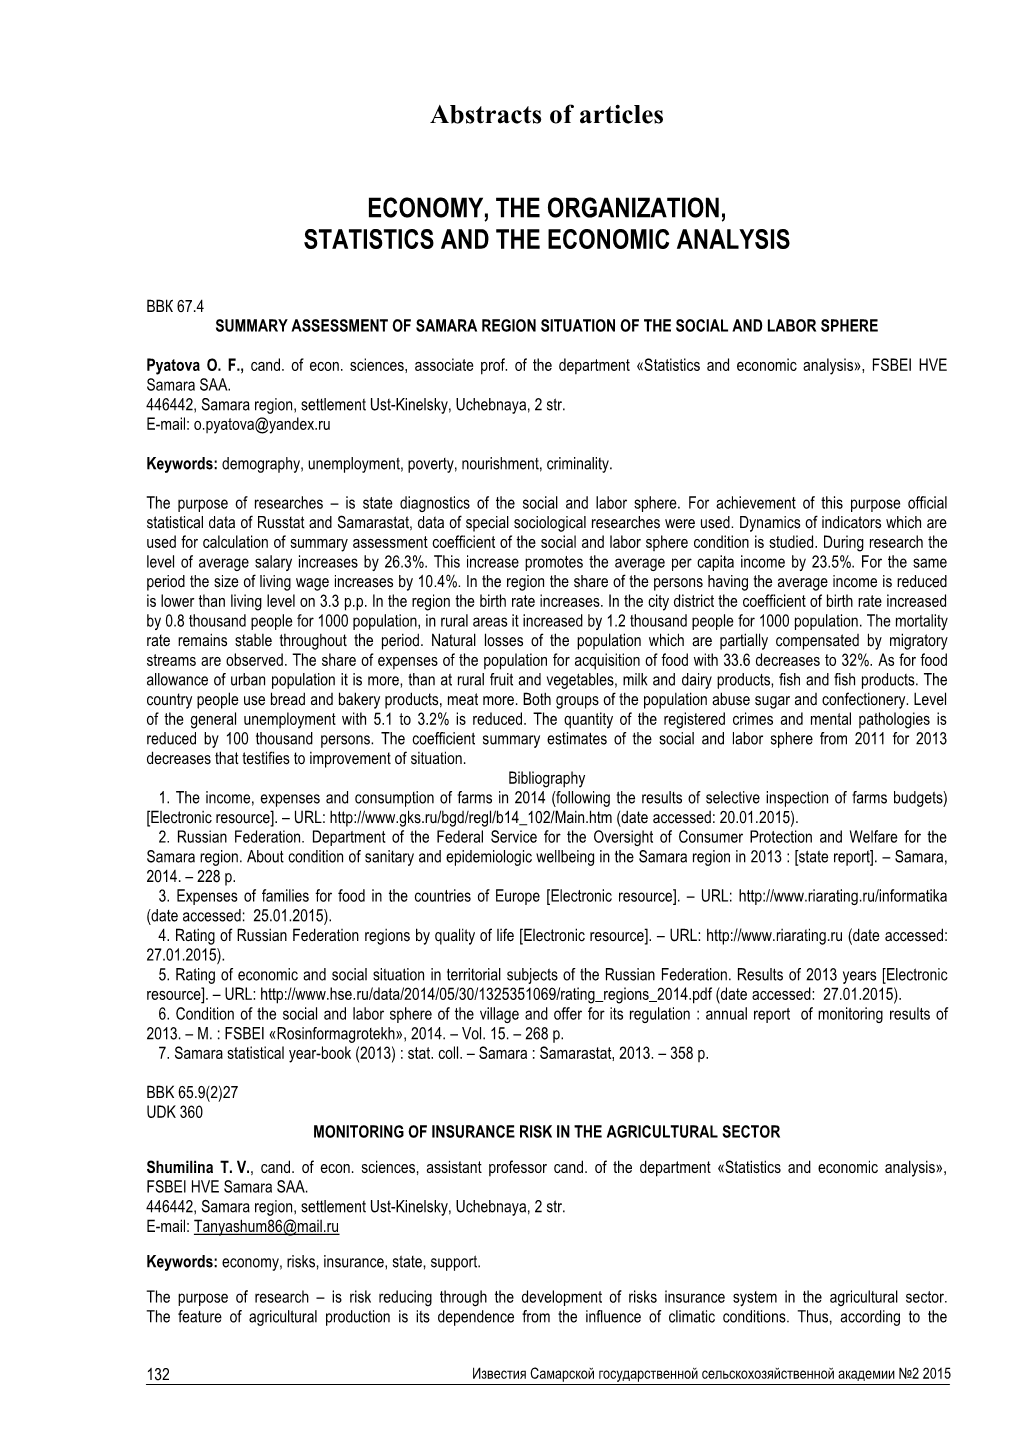 Abstracts of Articles ECONOMY, the ORGANIZATION, STATISTICS AND